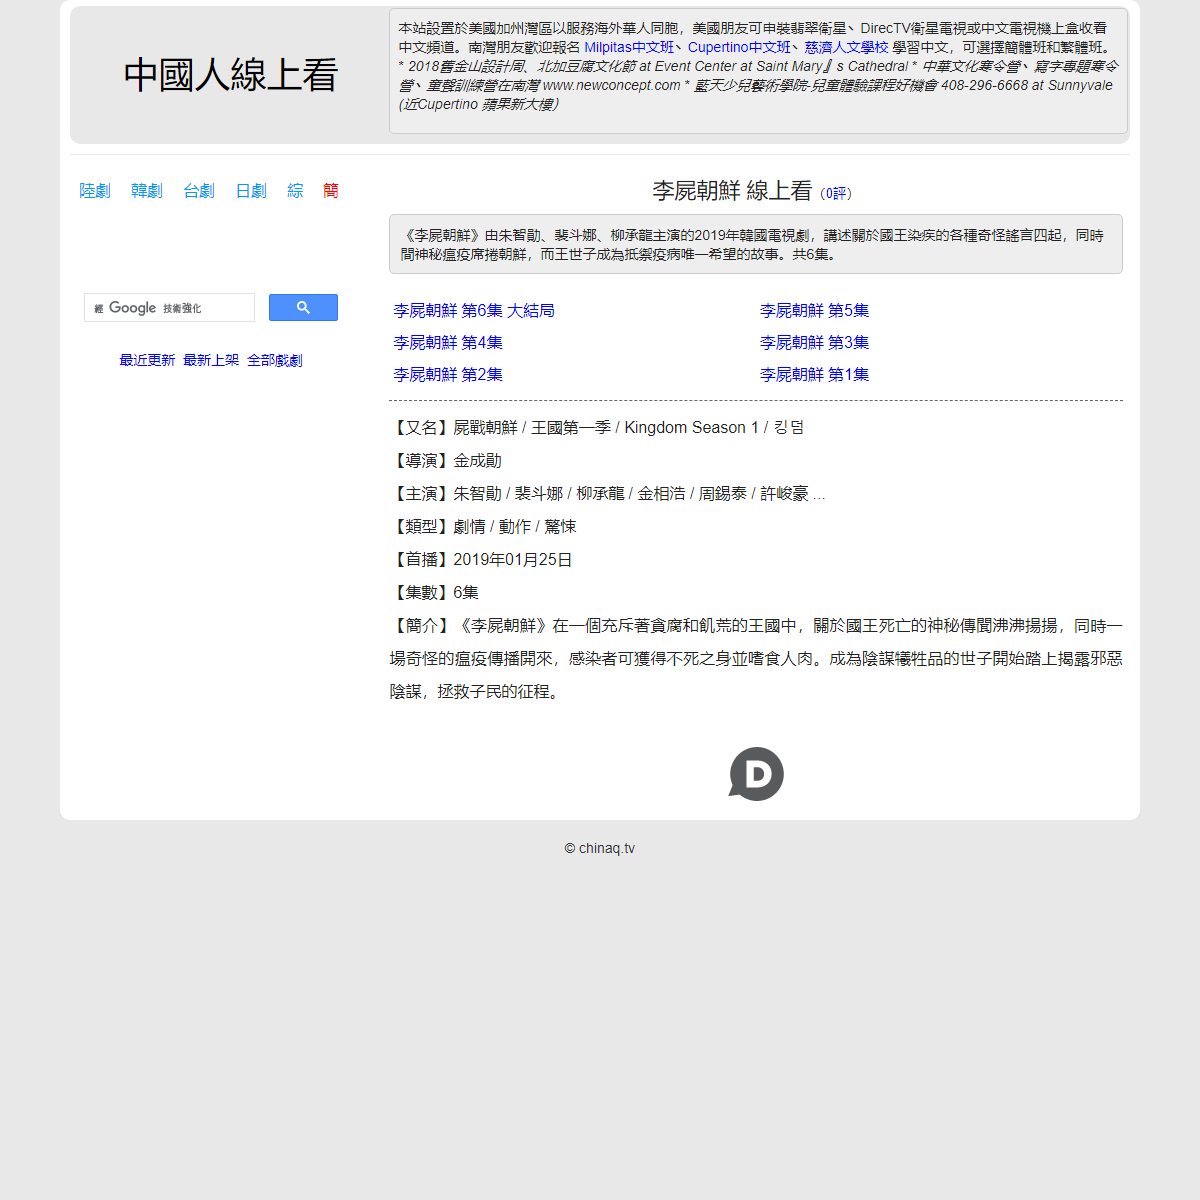 A complete backup of https://chinaq.tv/kr190125/